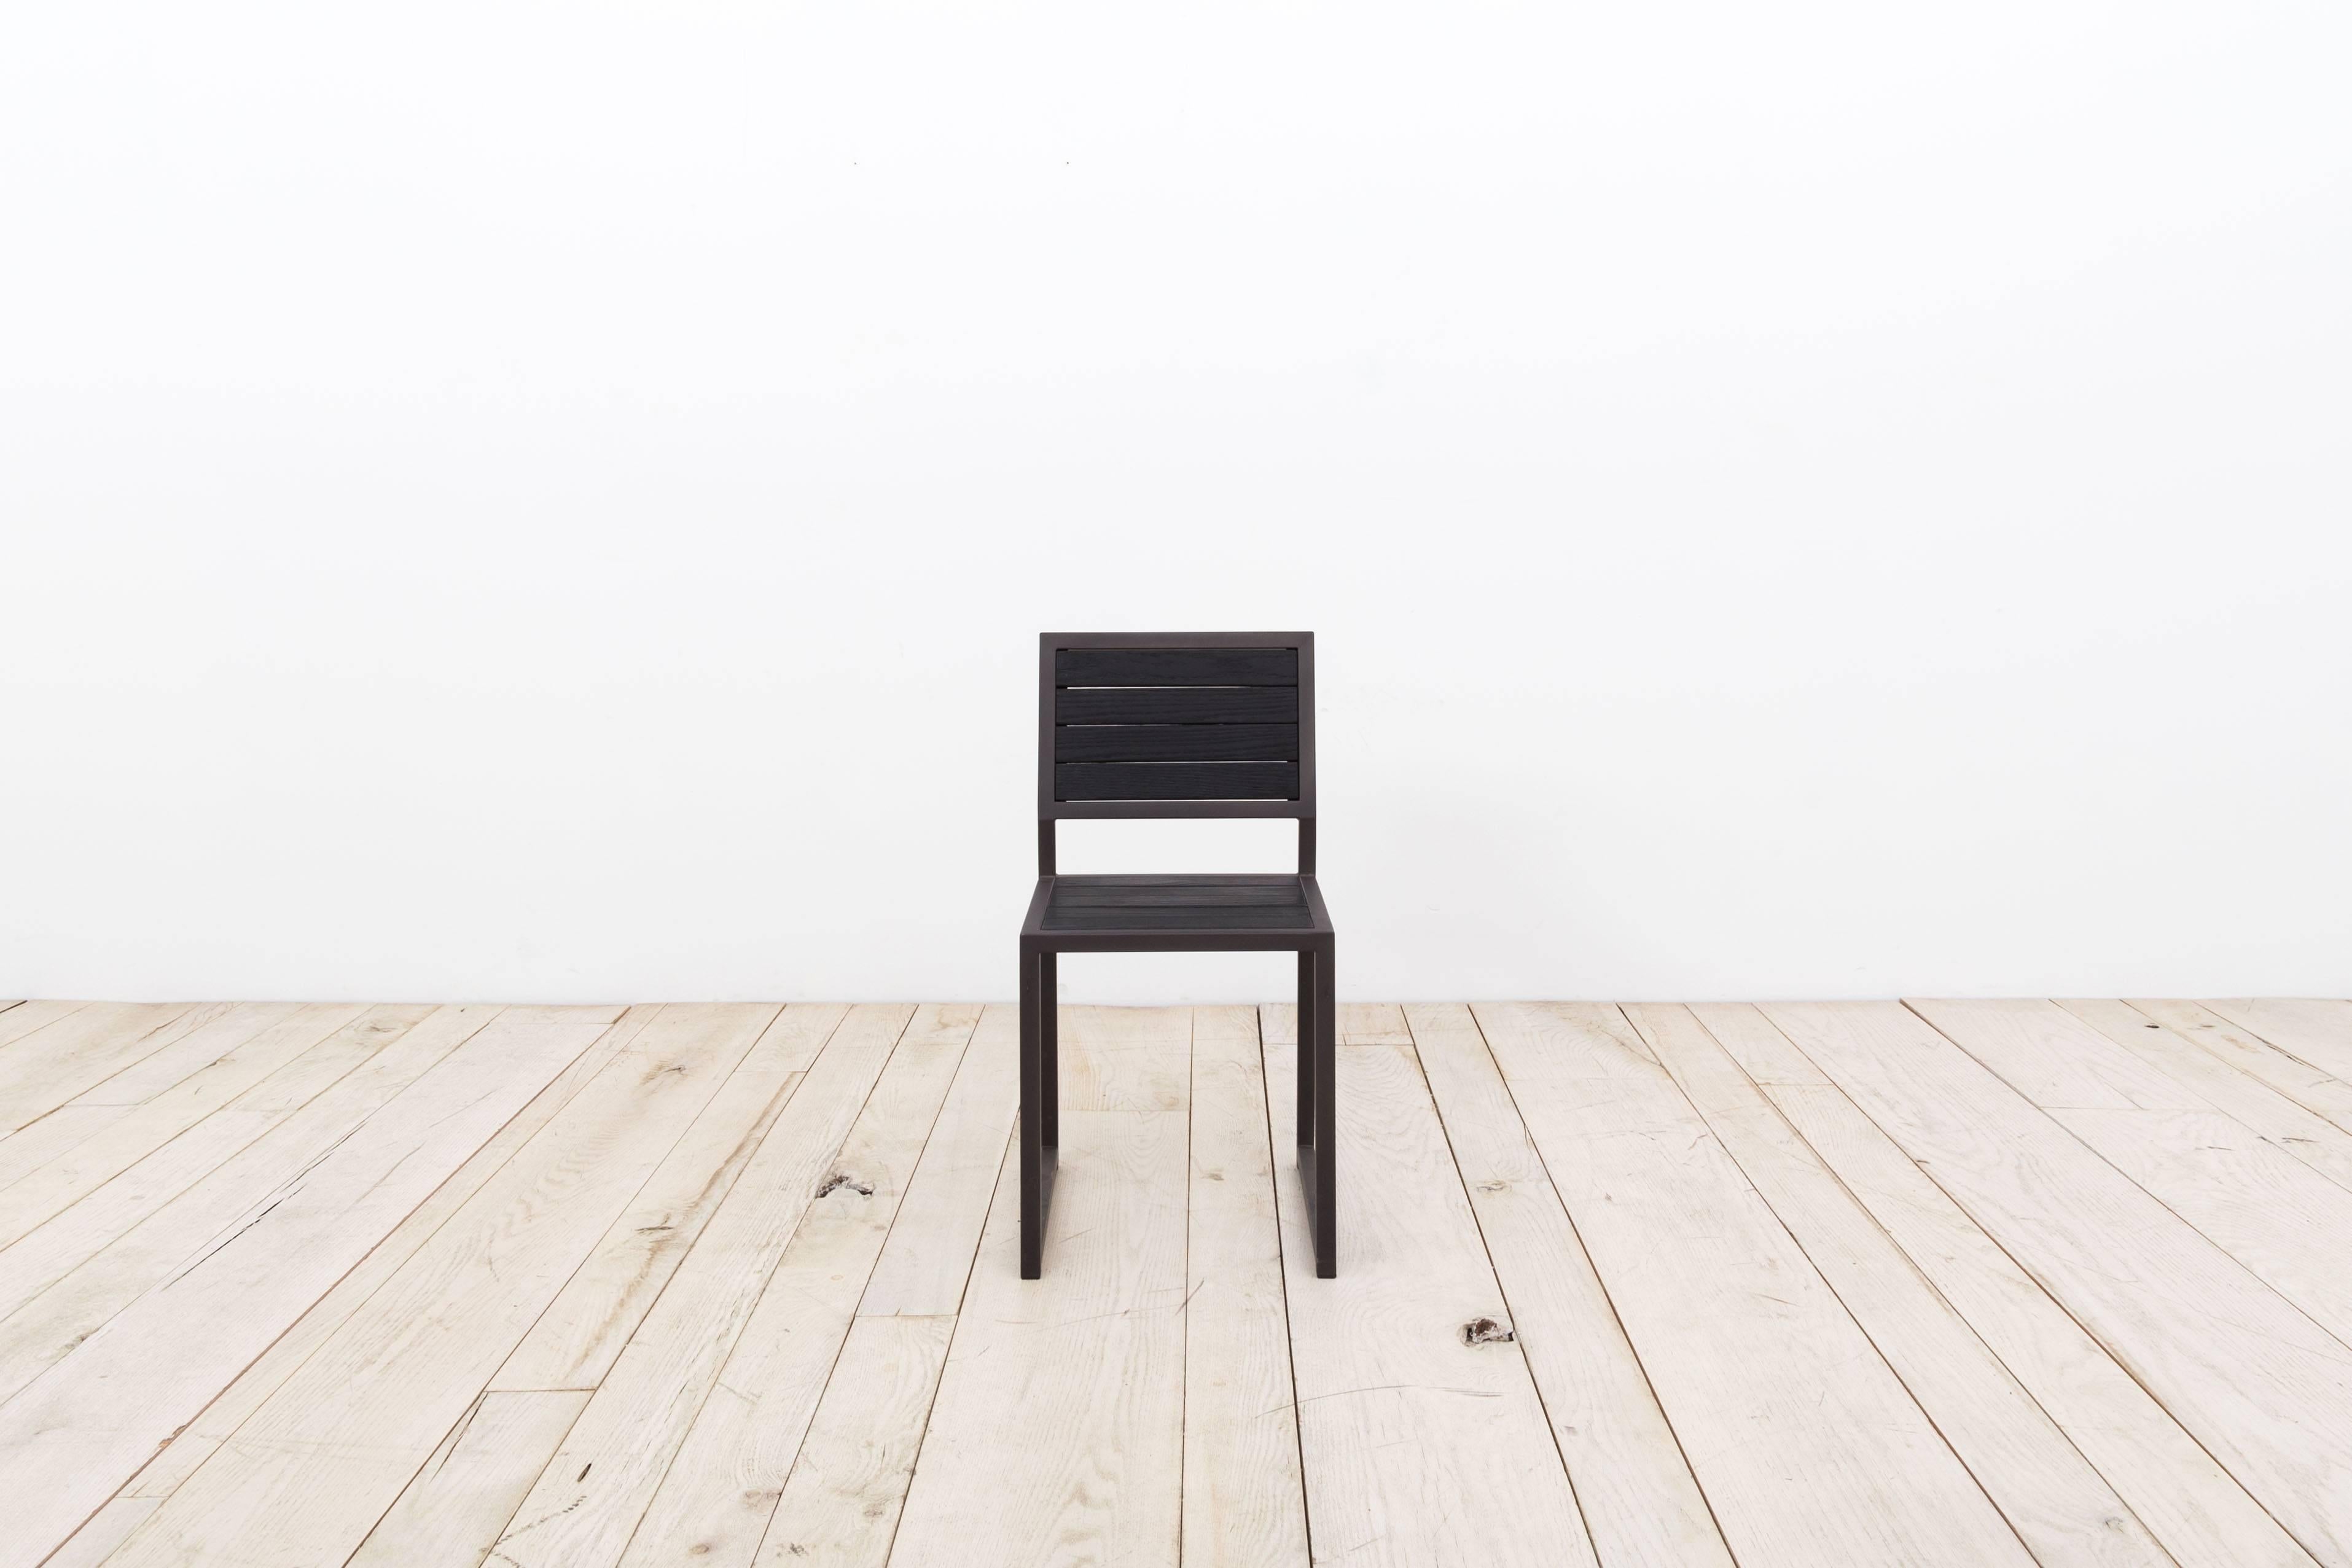 The 1x1 Chair is made from a 1 x 1 box tubing frame and inset wood seat and back. The low back and boxed leg has a distinctly contemporary look. 
